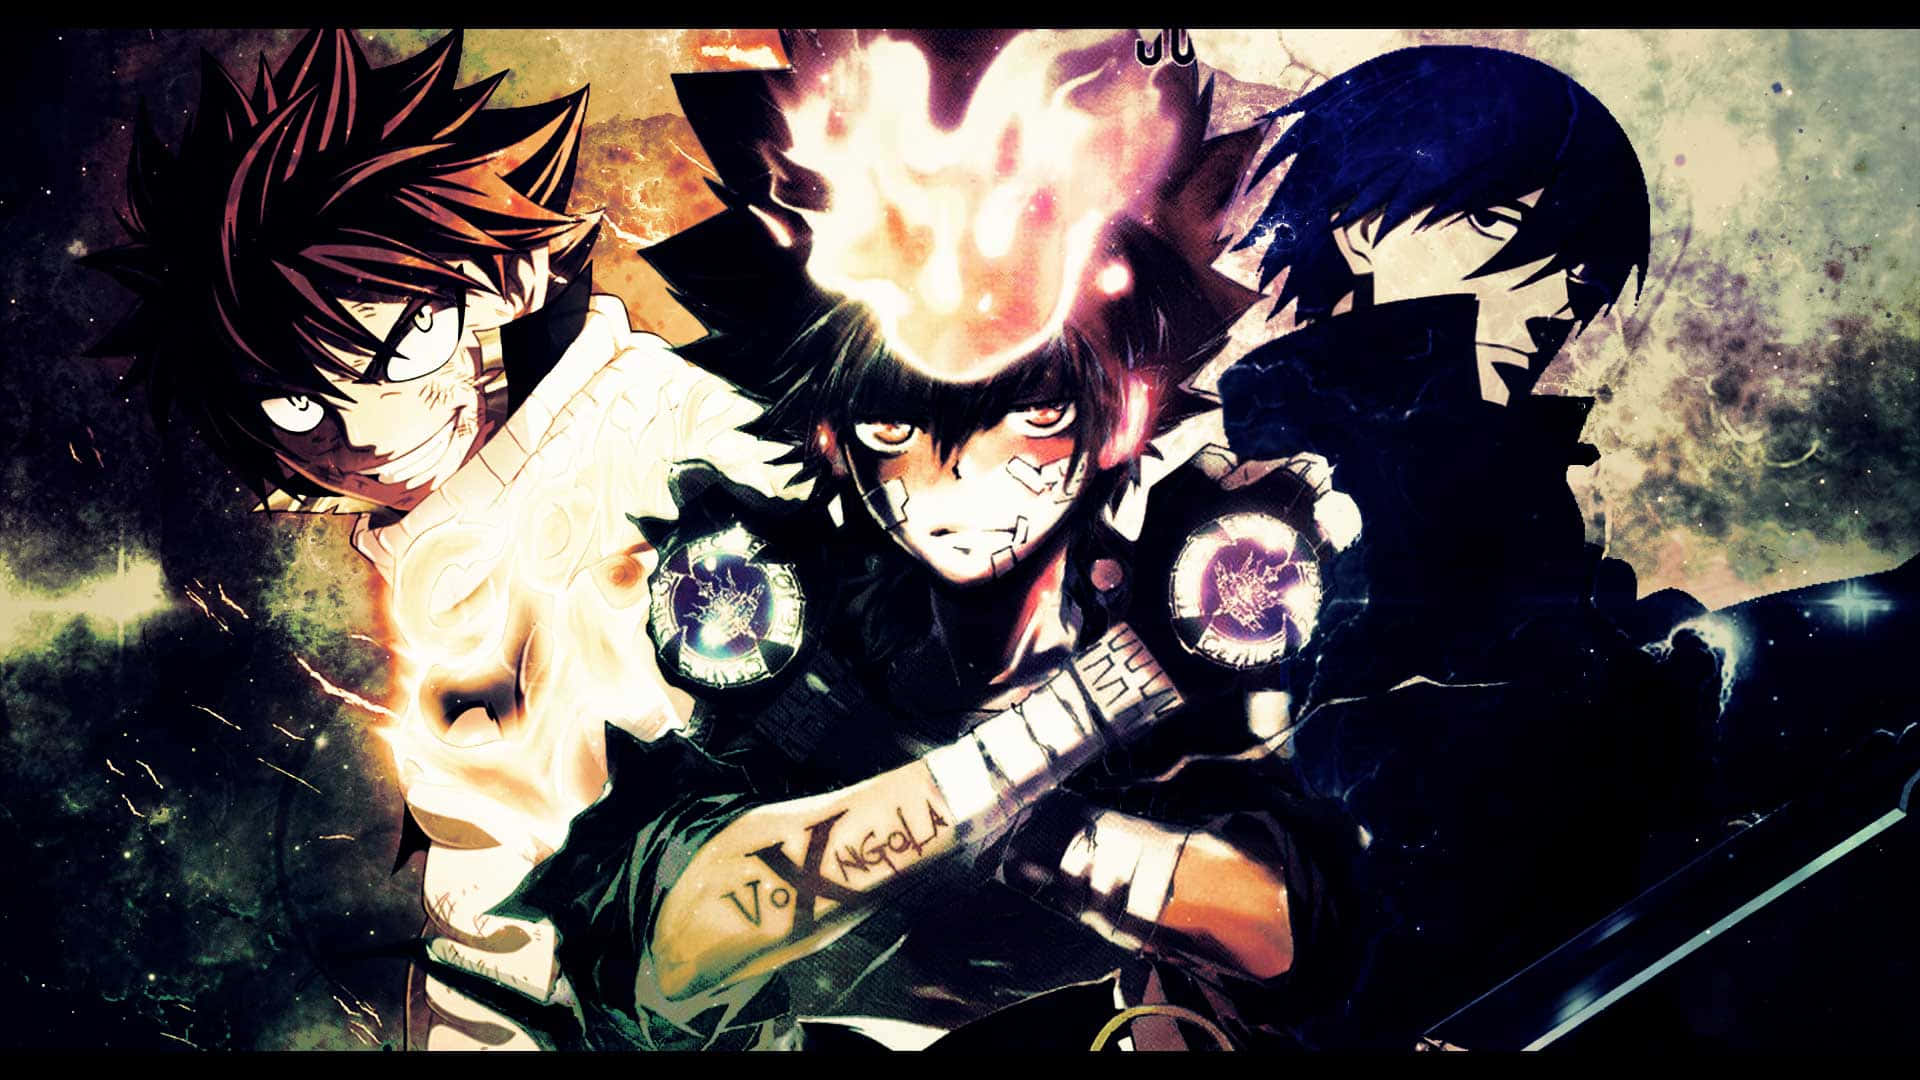 “The Fairy Tail Guild”